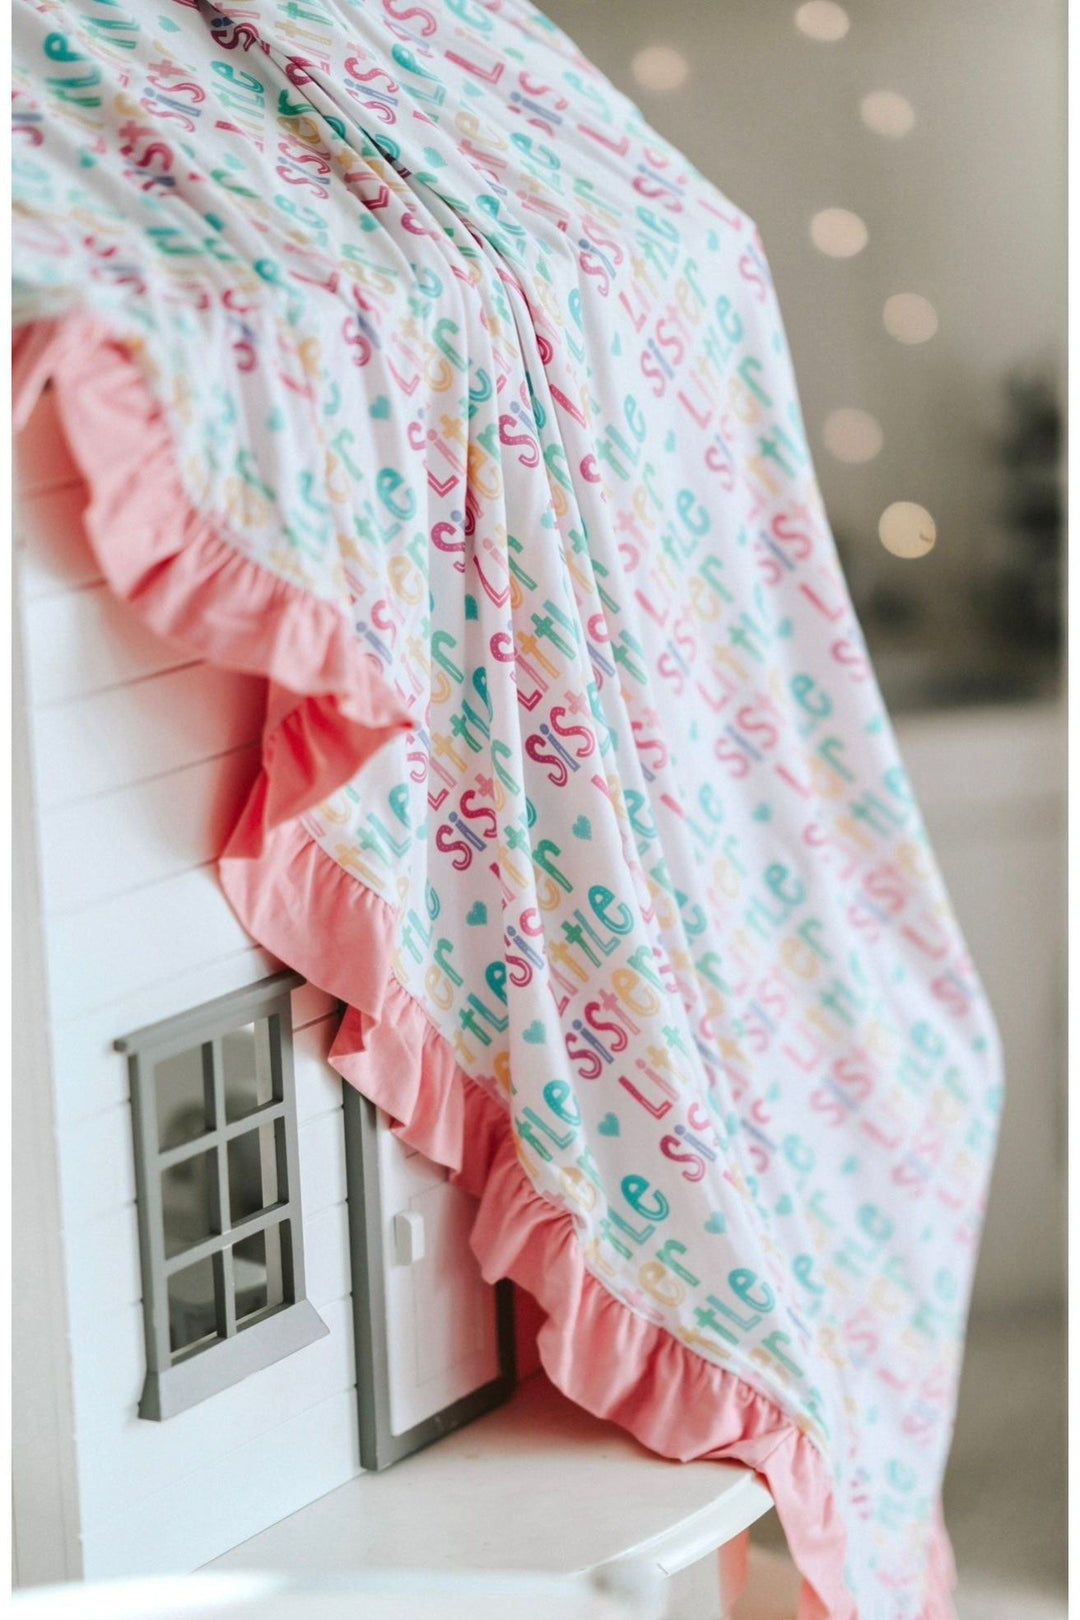 Colorful Pastel Bamboo Ruffle Blanket - Little Sister Cozy - Sophia Rose Children's Boutique